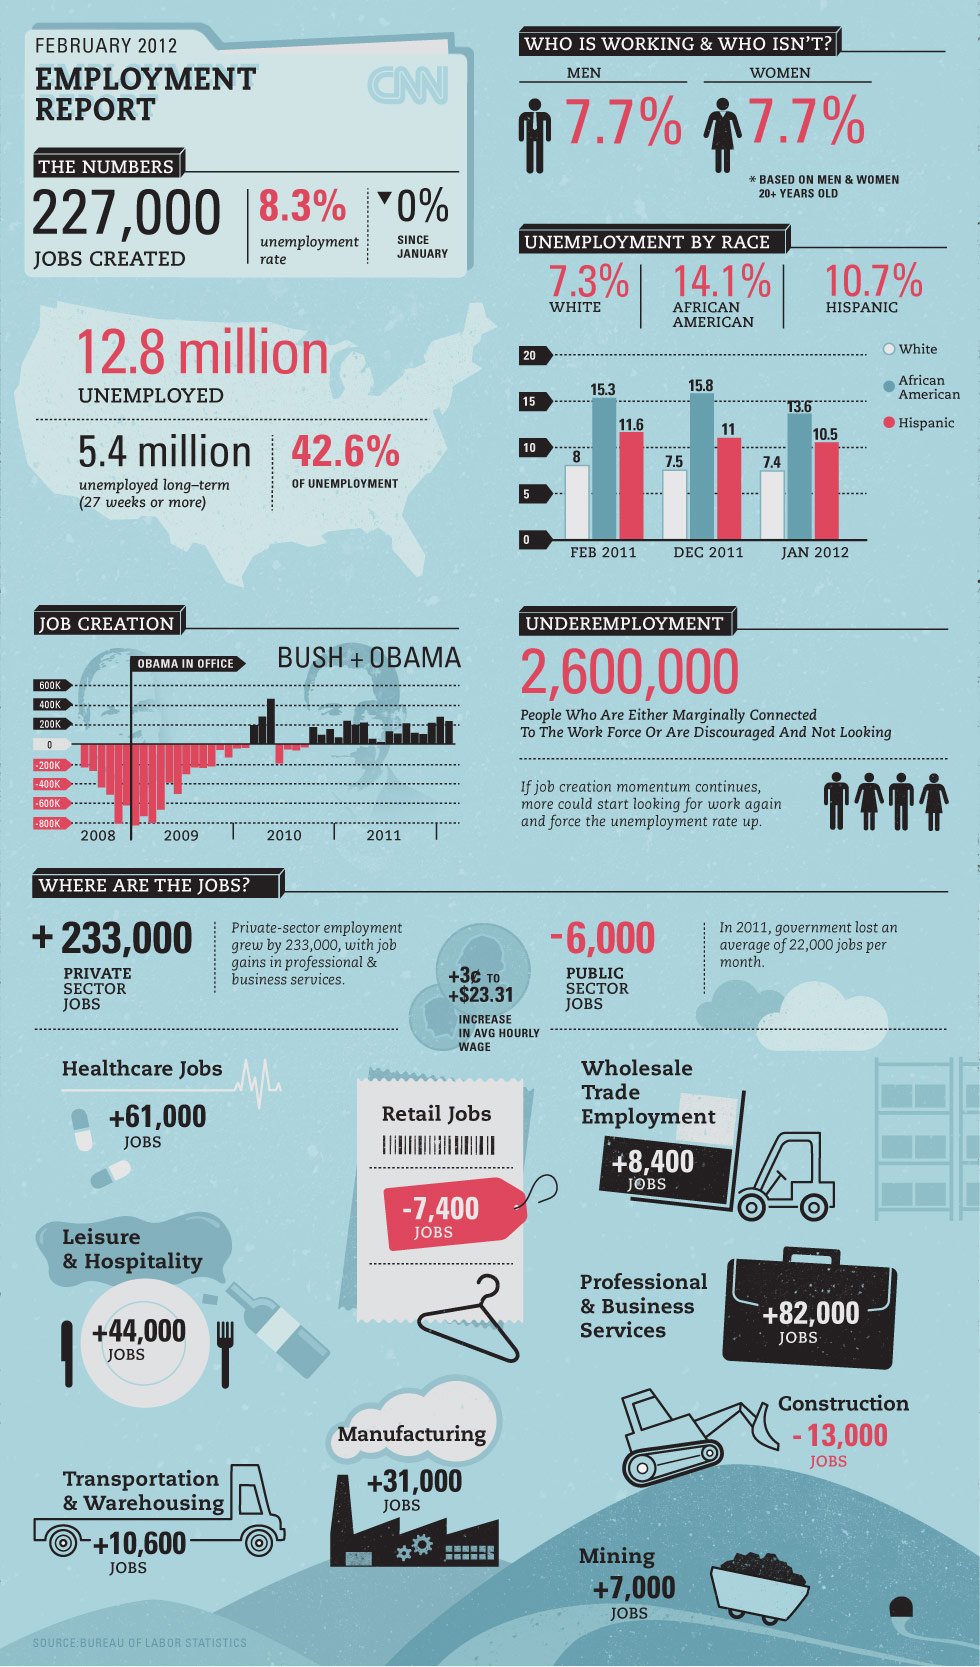 Example of a real Infographic design showing the Employment Report in Feburary 2012, who is working and who isn't, unemployment by race, etc.